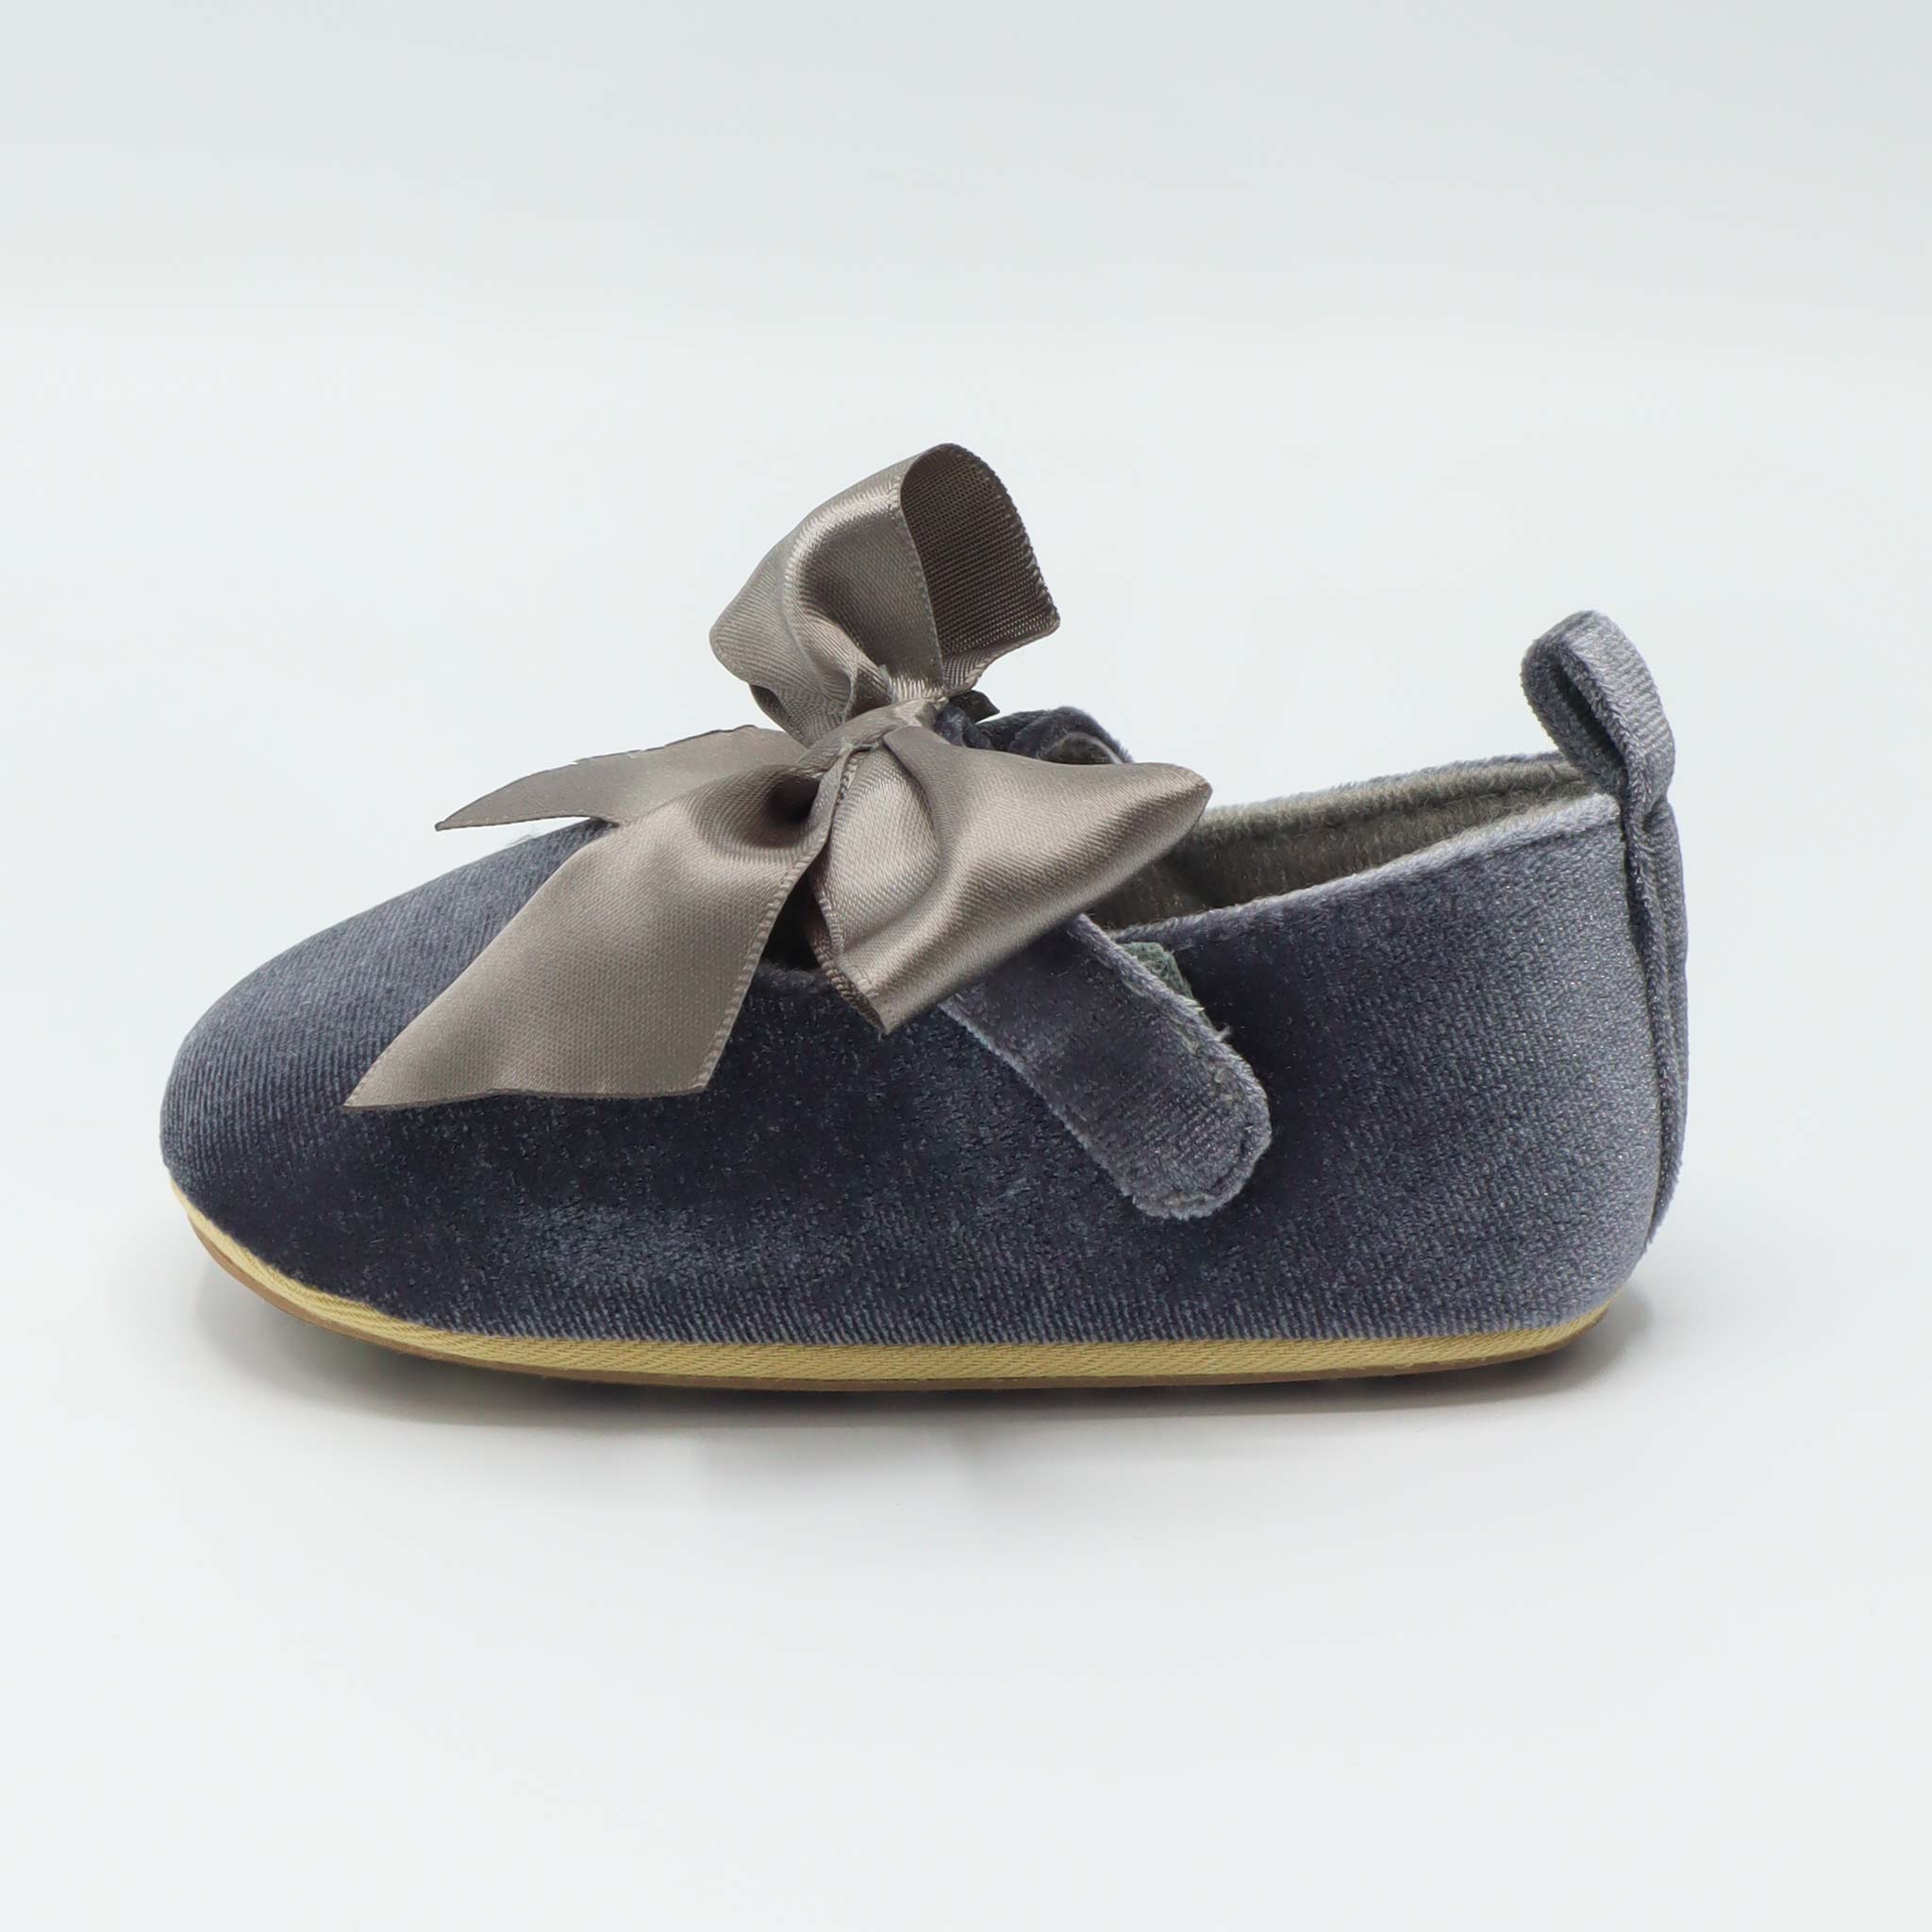 Baby Shoes Grey Color with Bow